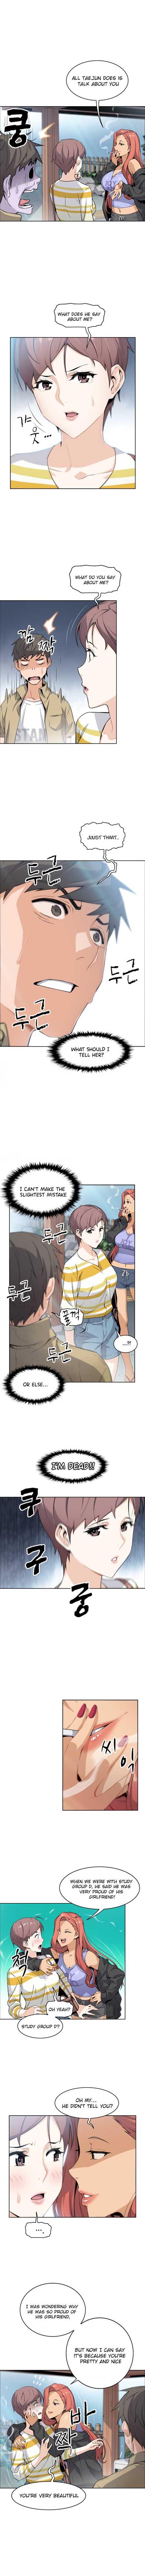 Housekeeper [Neck Pillow, Paper] Ch.49/49 [English] [Manhwa PDF] Completed 26